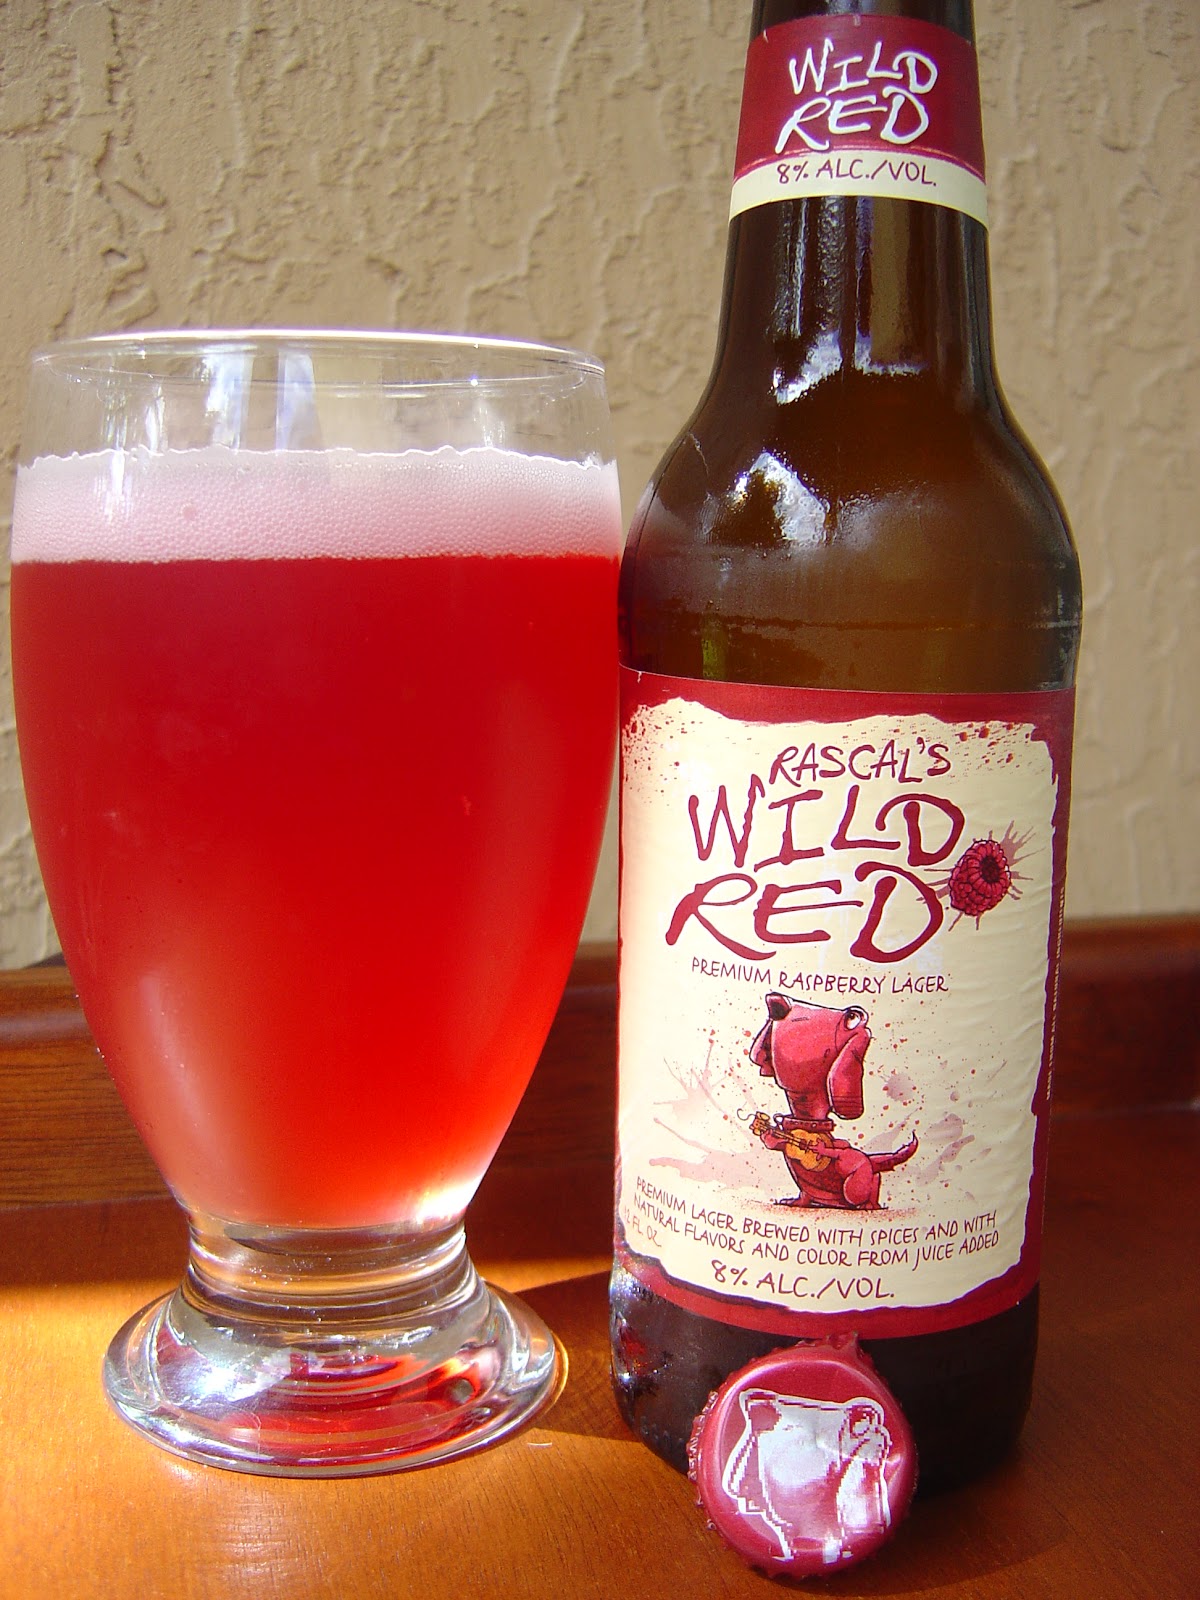 Daily Beer Review: Rascal's Wild Red